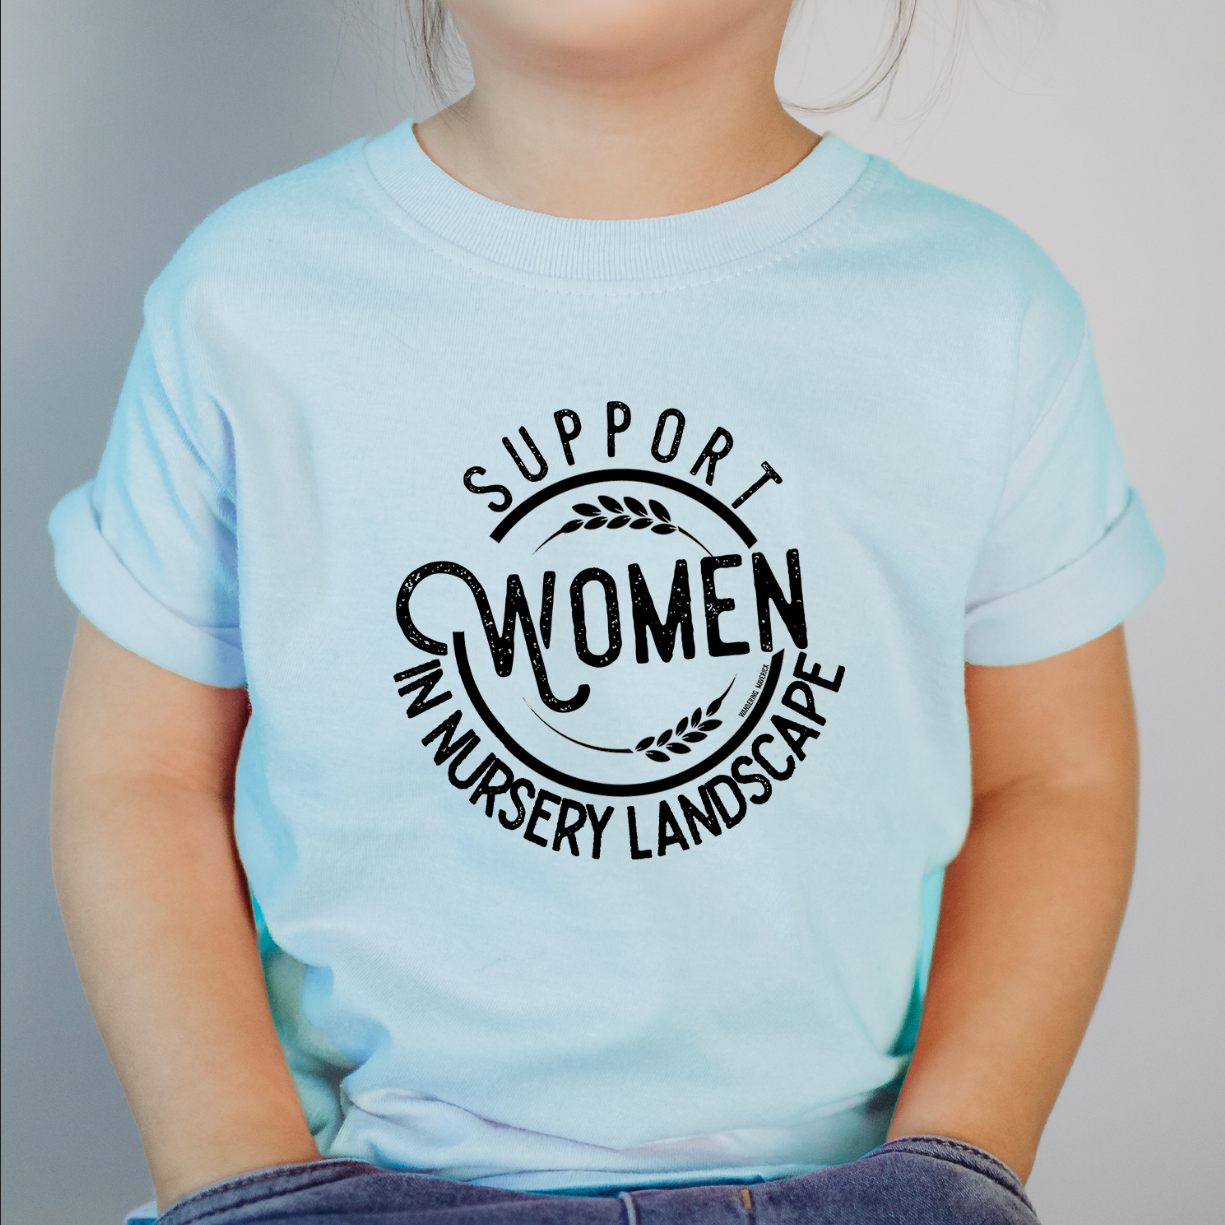 Support Women In Nursery Landscape One Piece/T-Shirt (Newborn - Youth XL) - Multiple Colors!